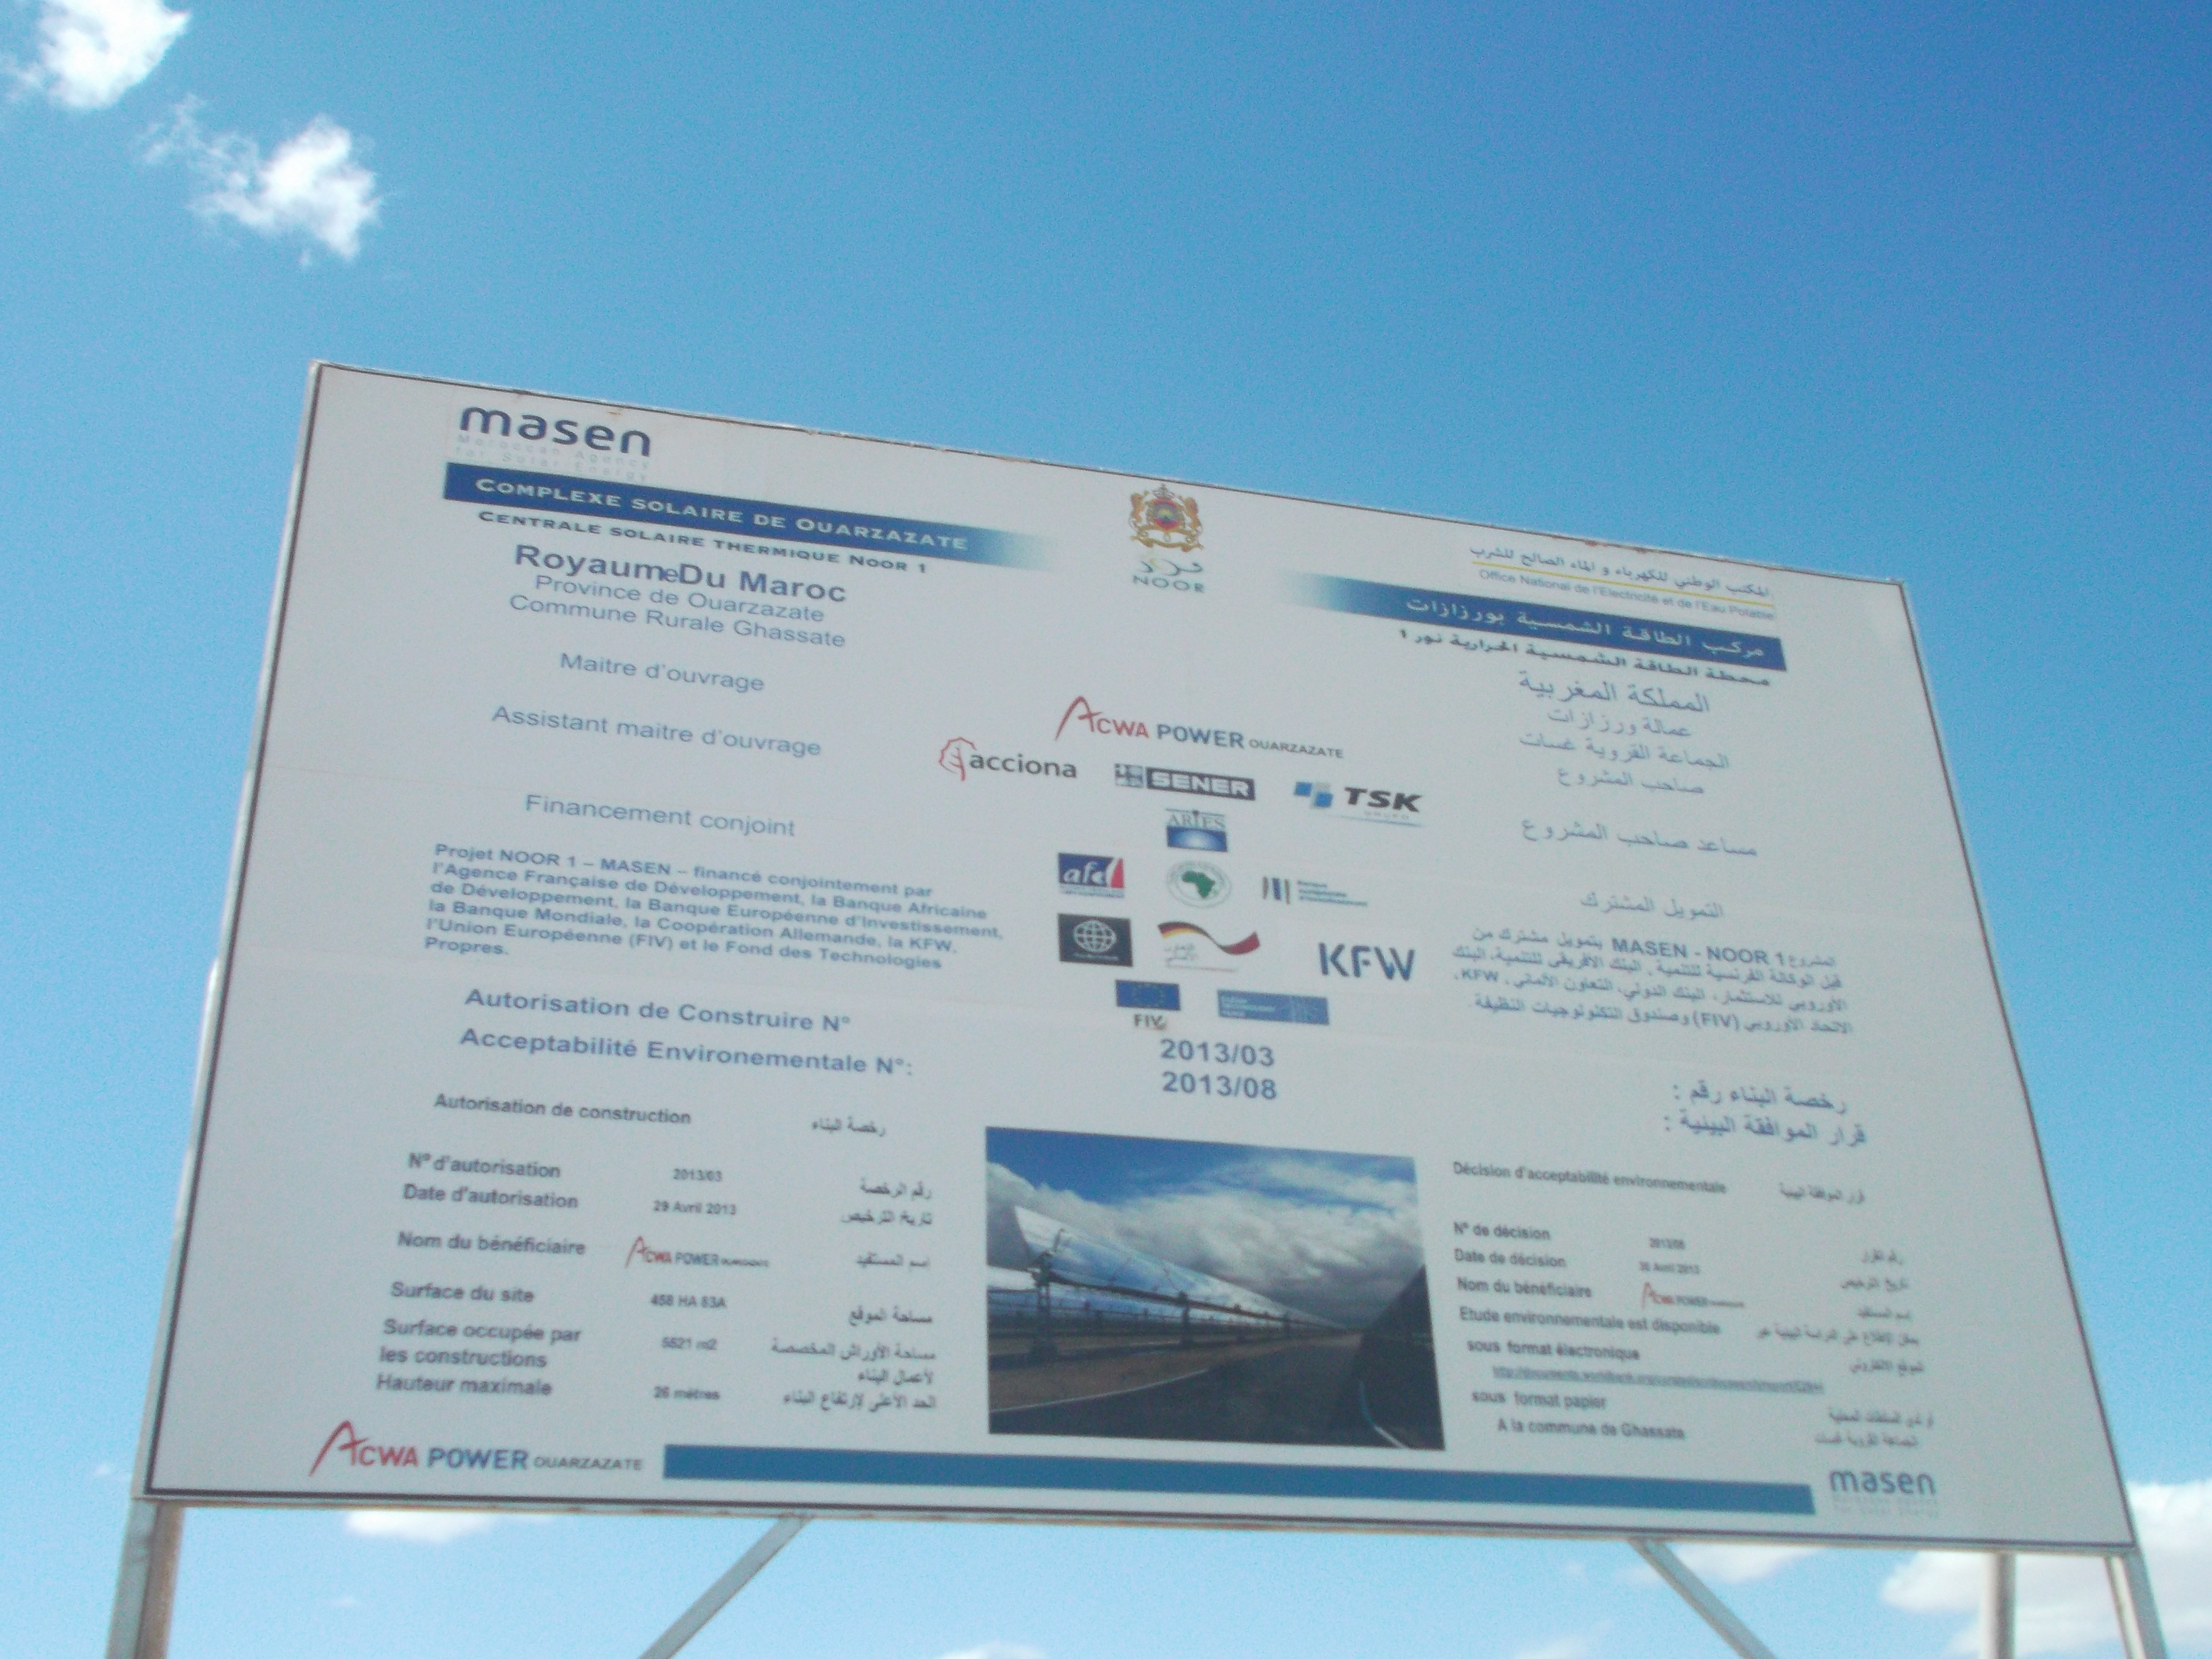 The sign at the entrance of the Noor solar thermal power plant being construction outside of Ouarzazate.